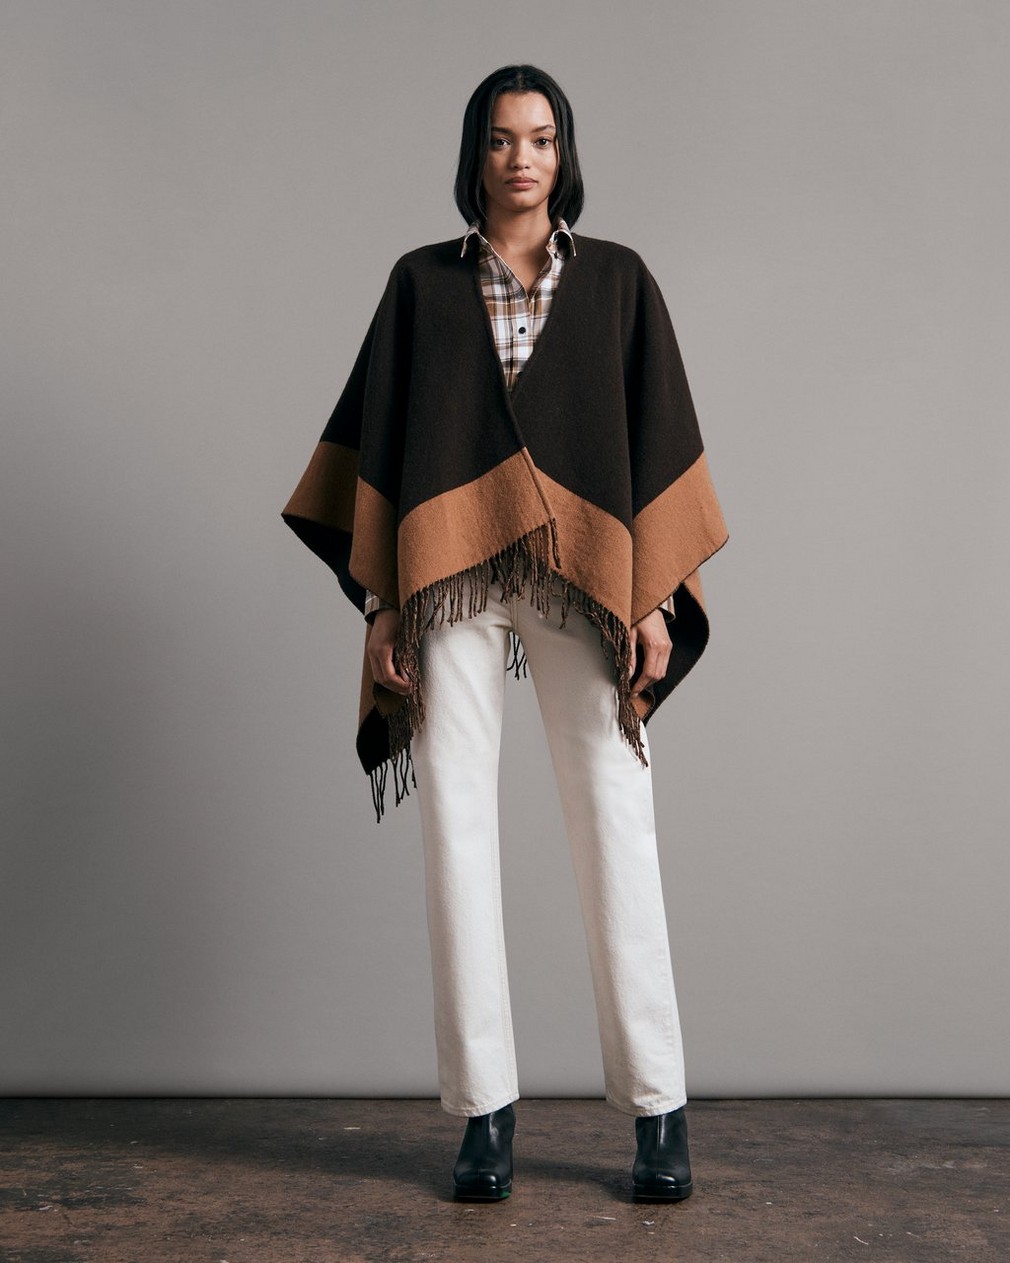 Highlands Wool Reversible Poncho